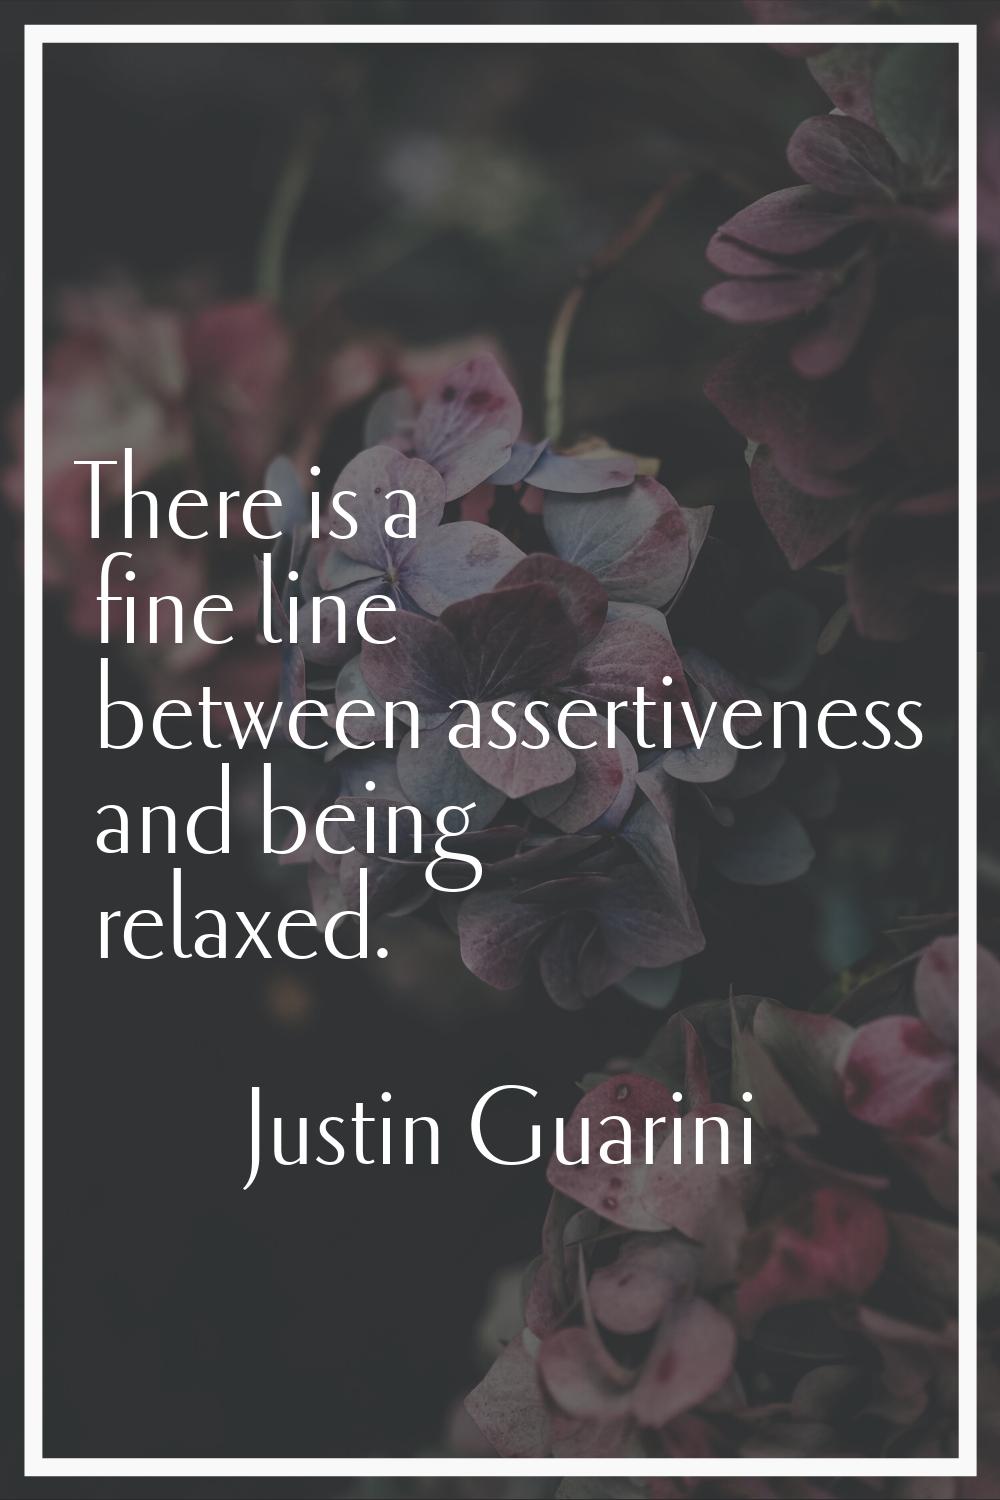 There is a fine line between assertiveness and being relaxed.